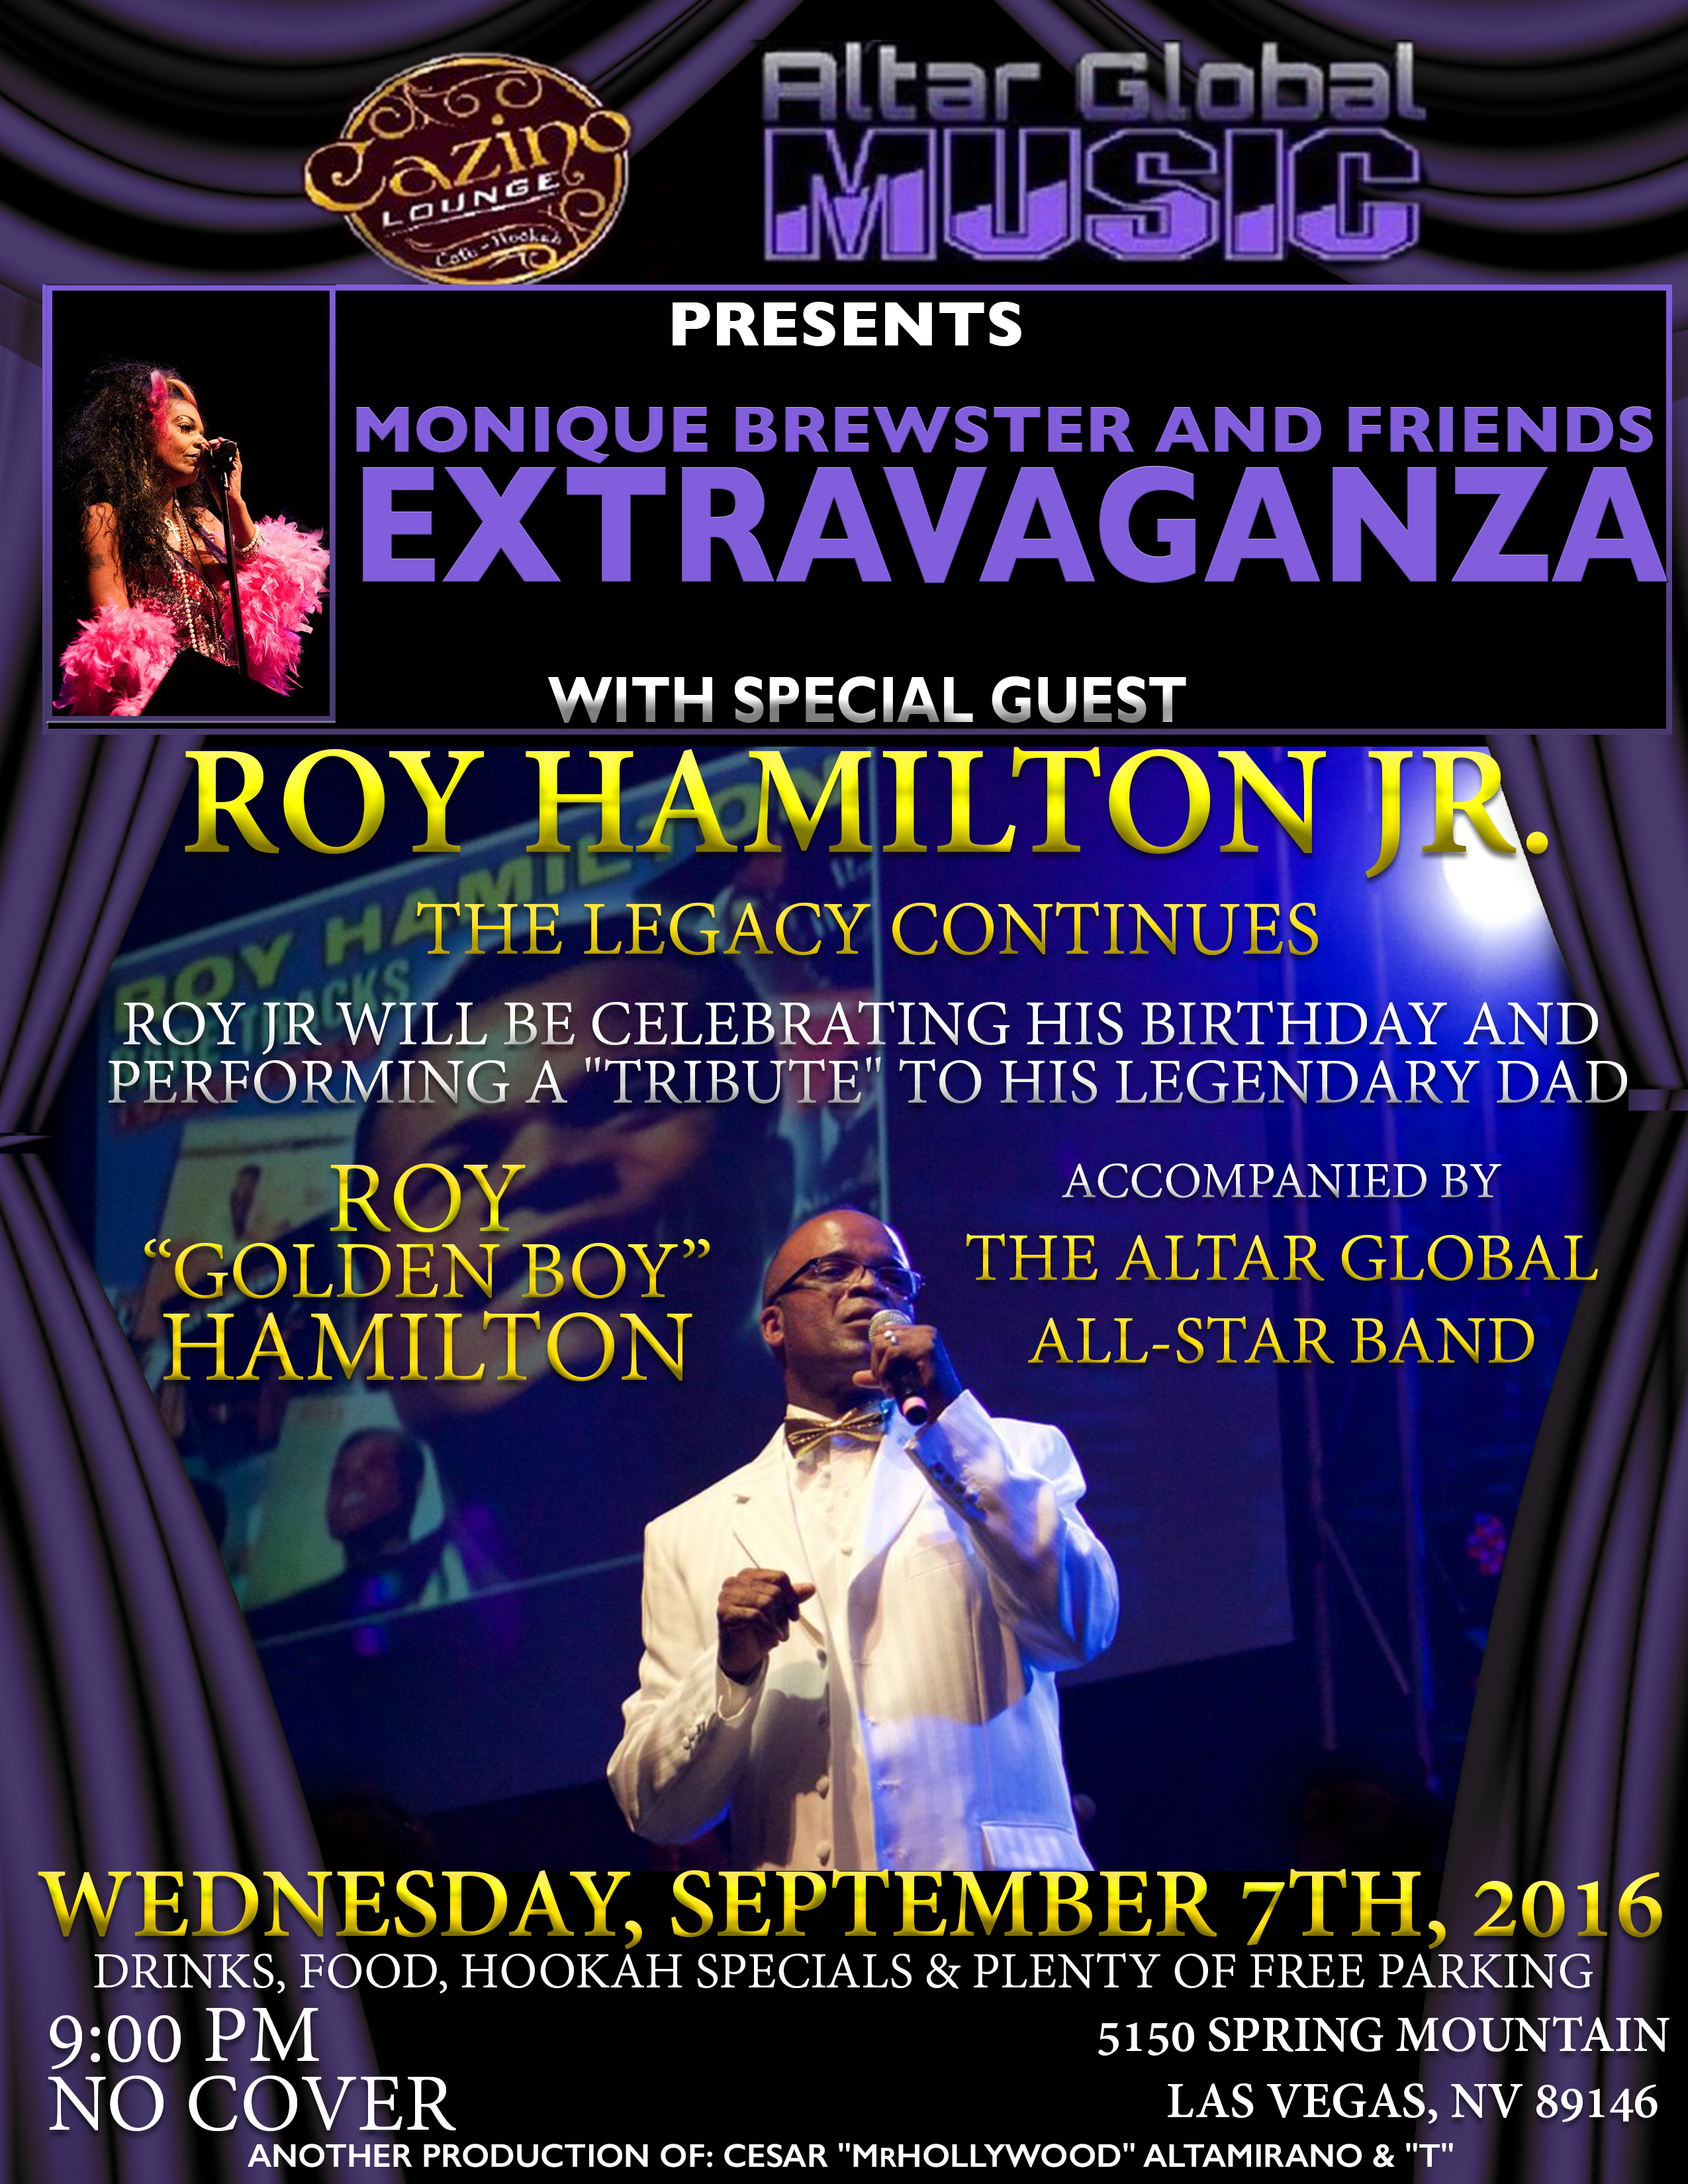 “The Legacy Continues” @ Monique Brewster & Friends Extravaganza, Wednesday, September 7, 2016